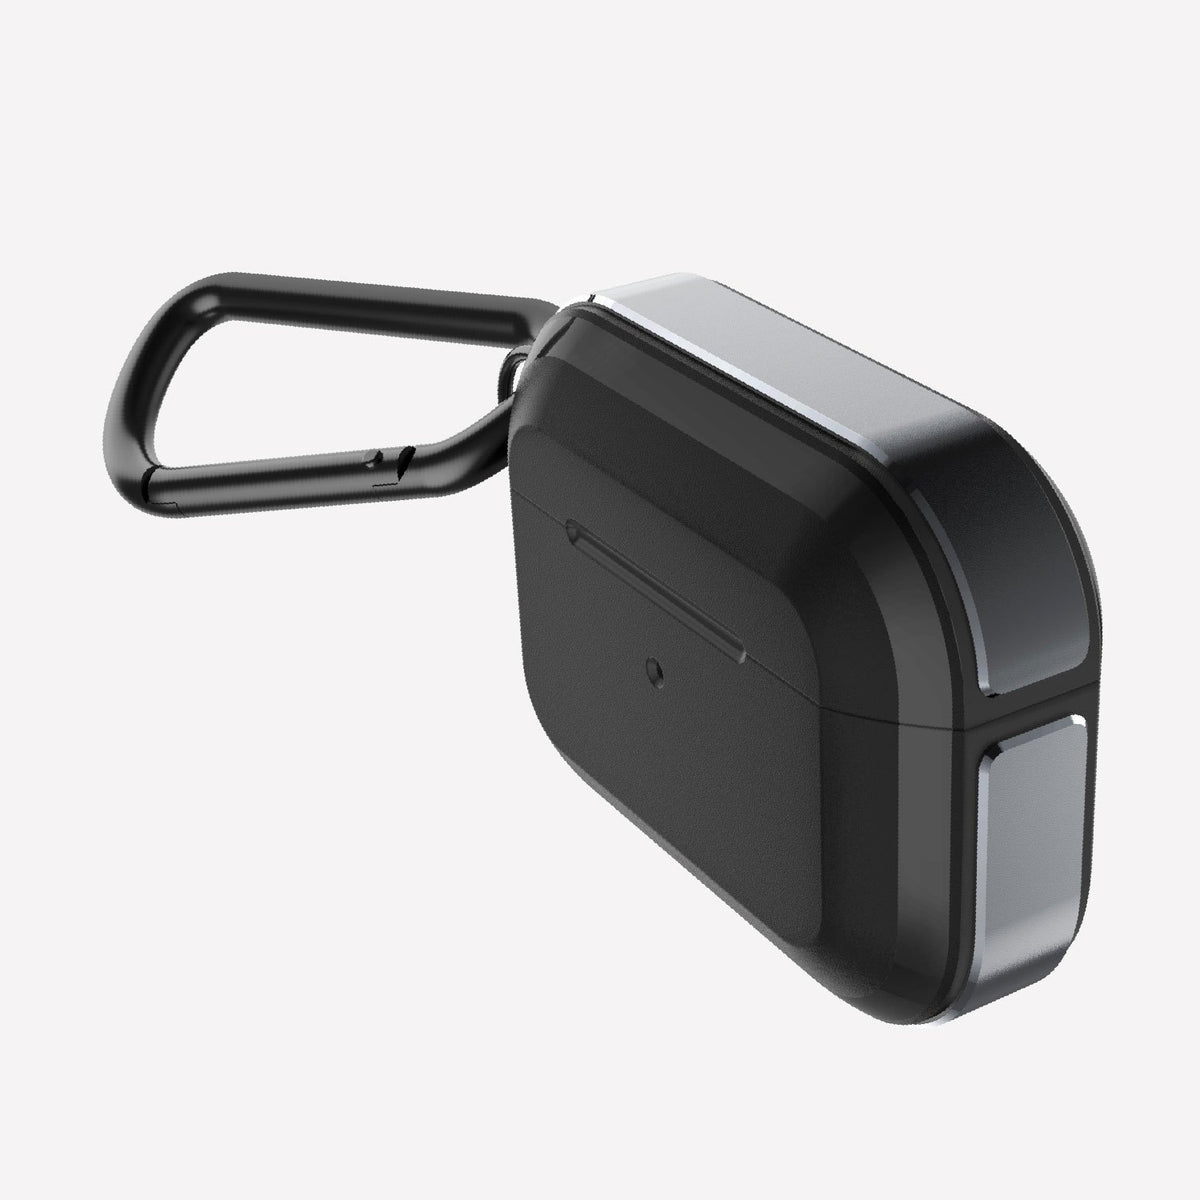 Enhance your Apple AirPods Pro experience with the sleek and stylish Raptic TREK case. This black case features a convenient handle, making it easy to carry and protect your Apple AirPods Pro Case - TREK.